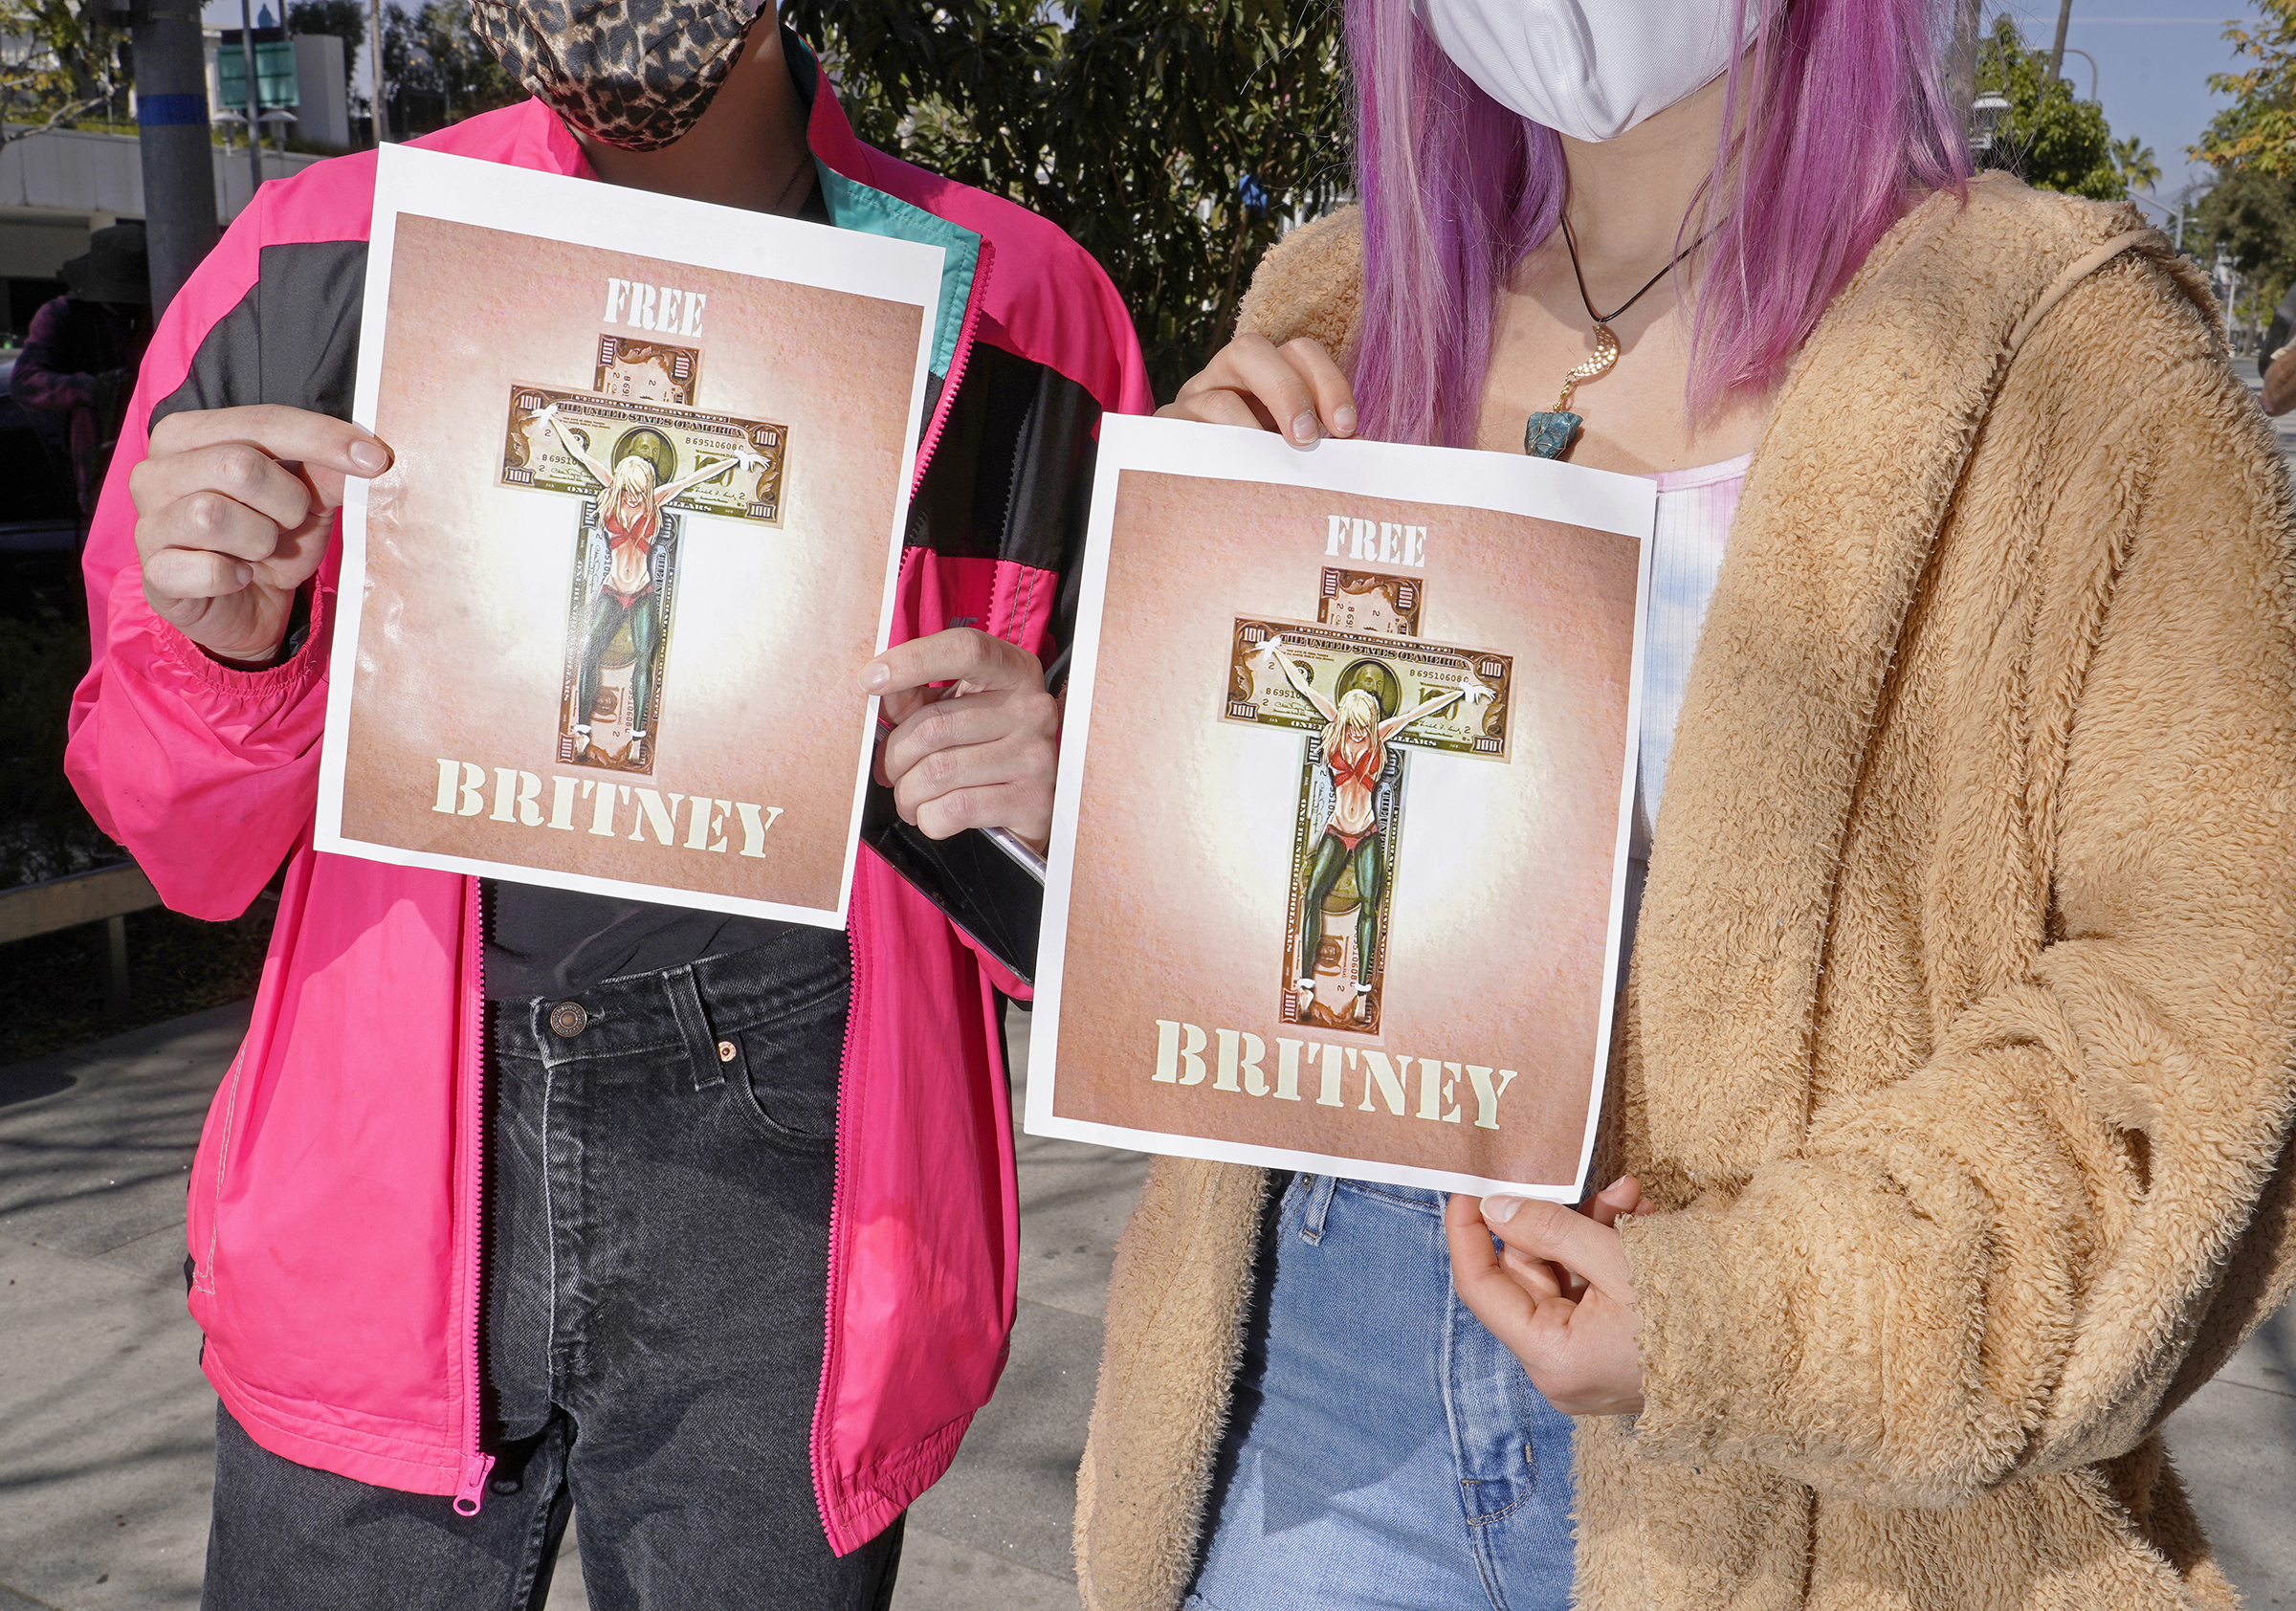 Two protesters hold signs outside a hearing related to Britney Spears' conservatorship in March 2021.